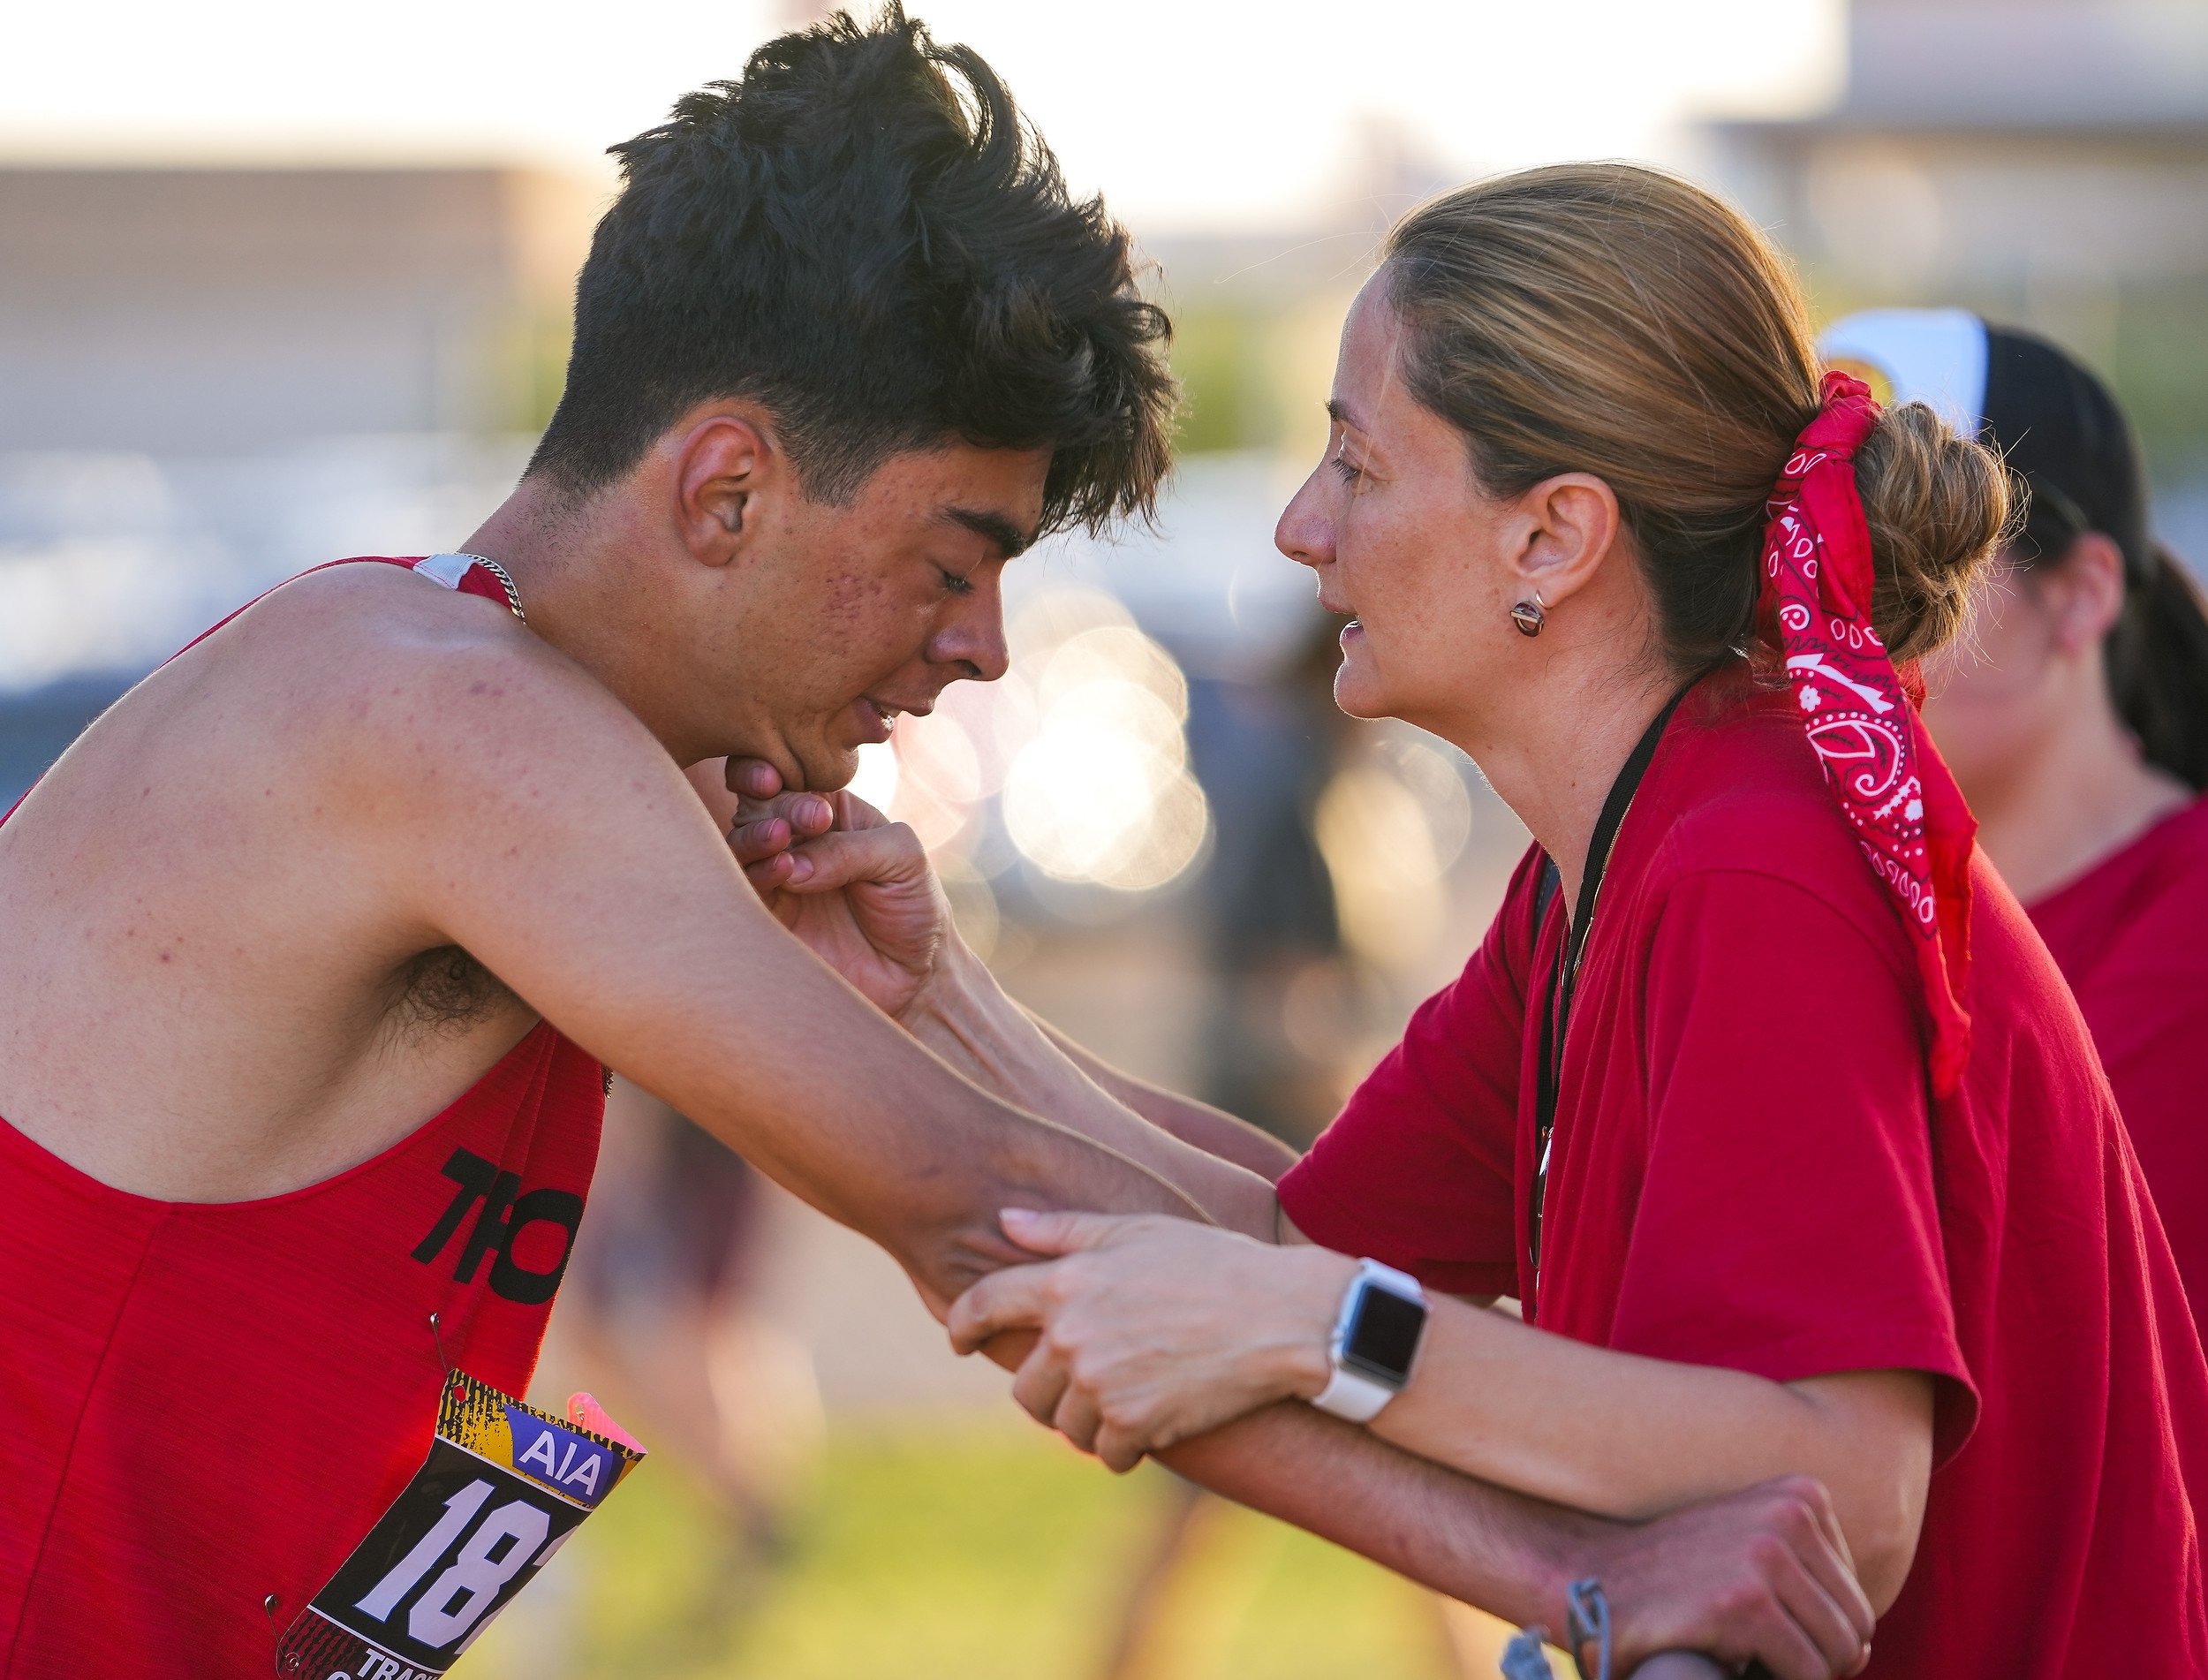  Paradise Valley's Erick Reyes is comforted by his mother Regina Reyes, right, after falling at the last hurdle during the Boys 300 Meter Hurdles Division Two race during the AIA State Track & Field Championships 2022 at Mesa Community College on Sat